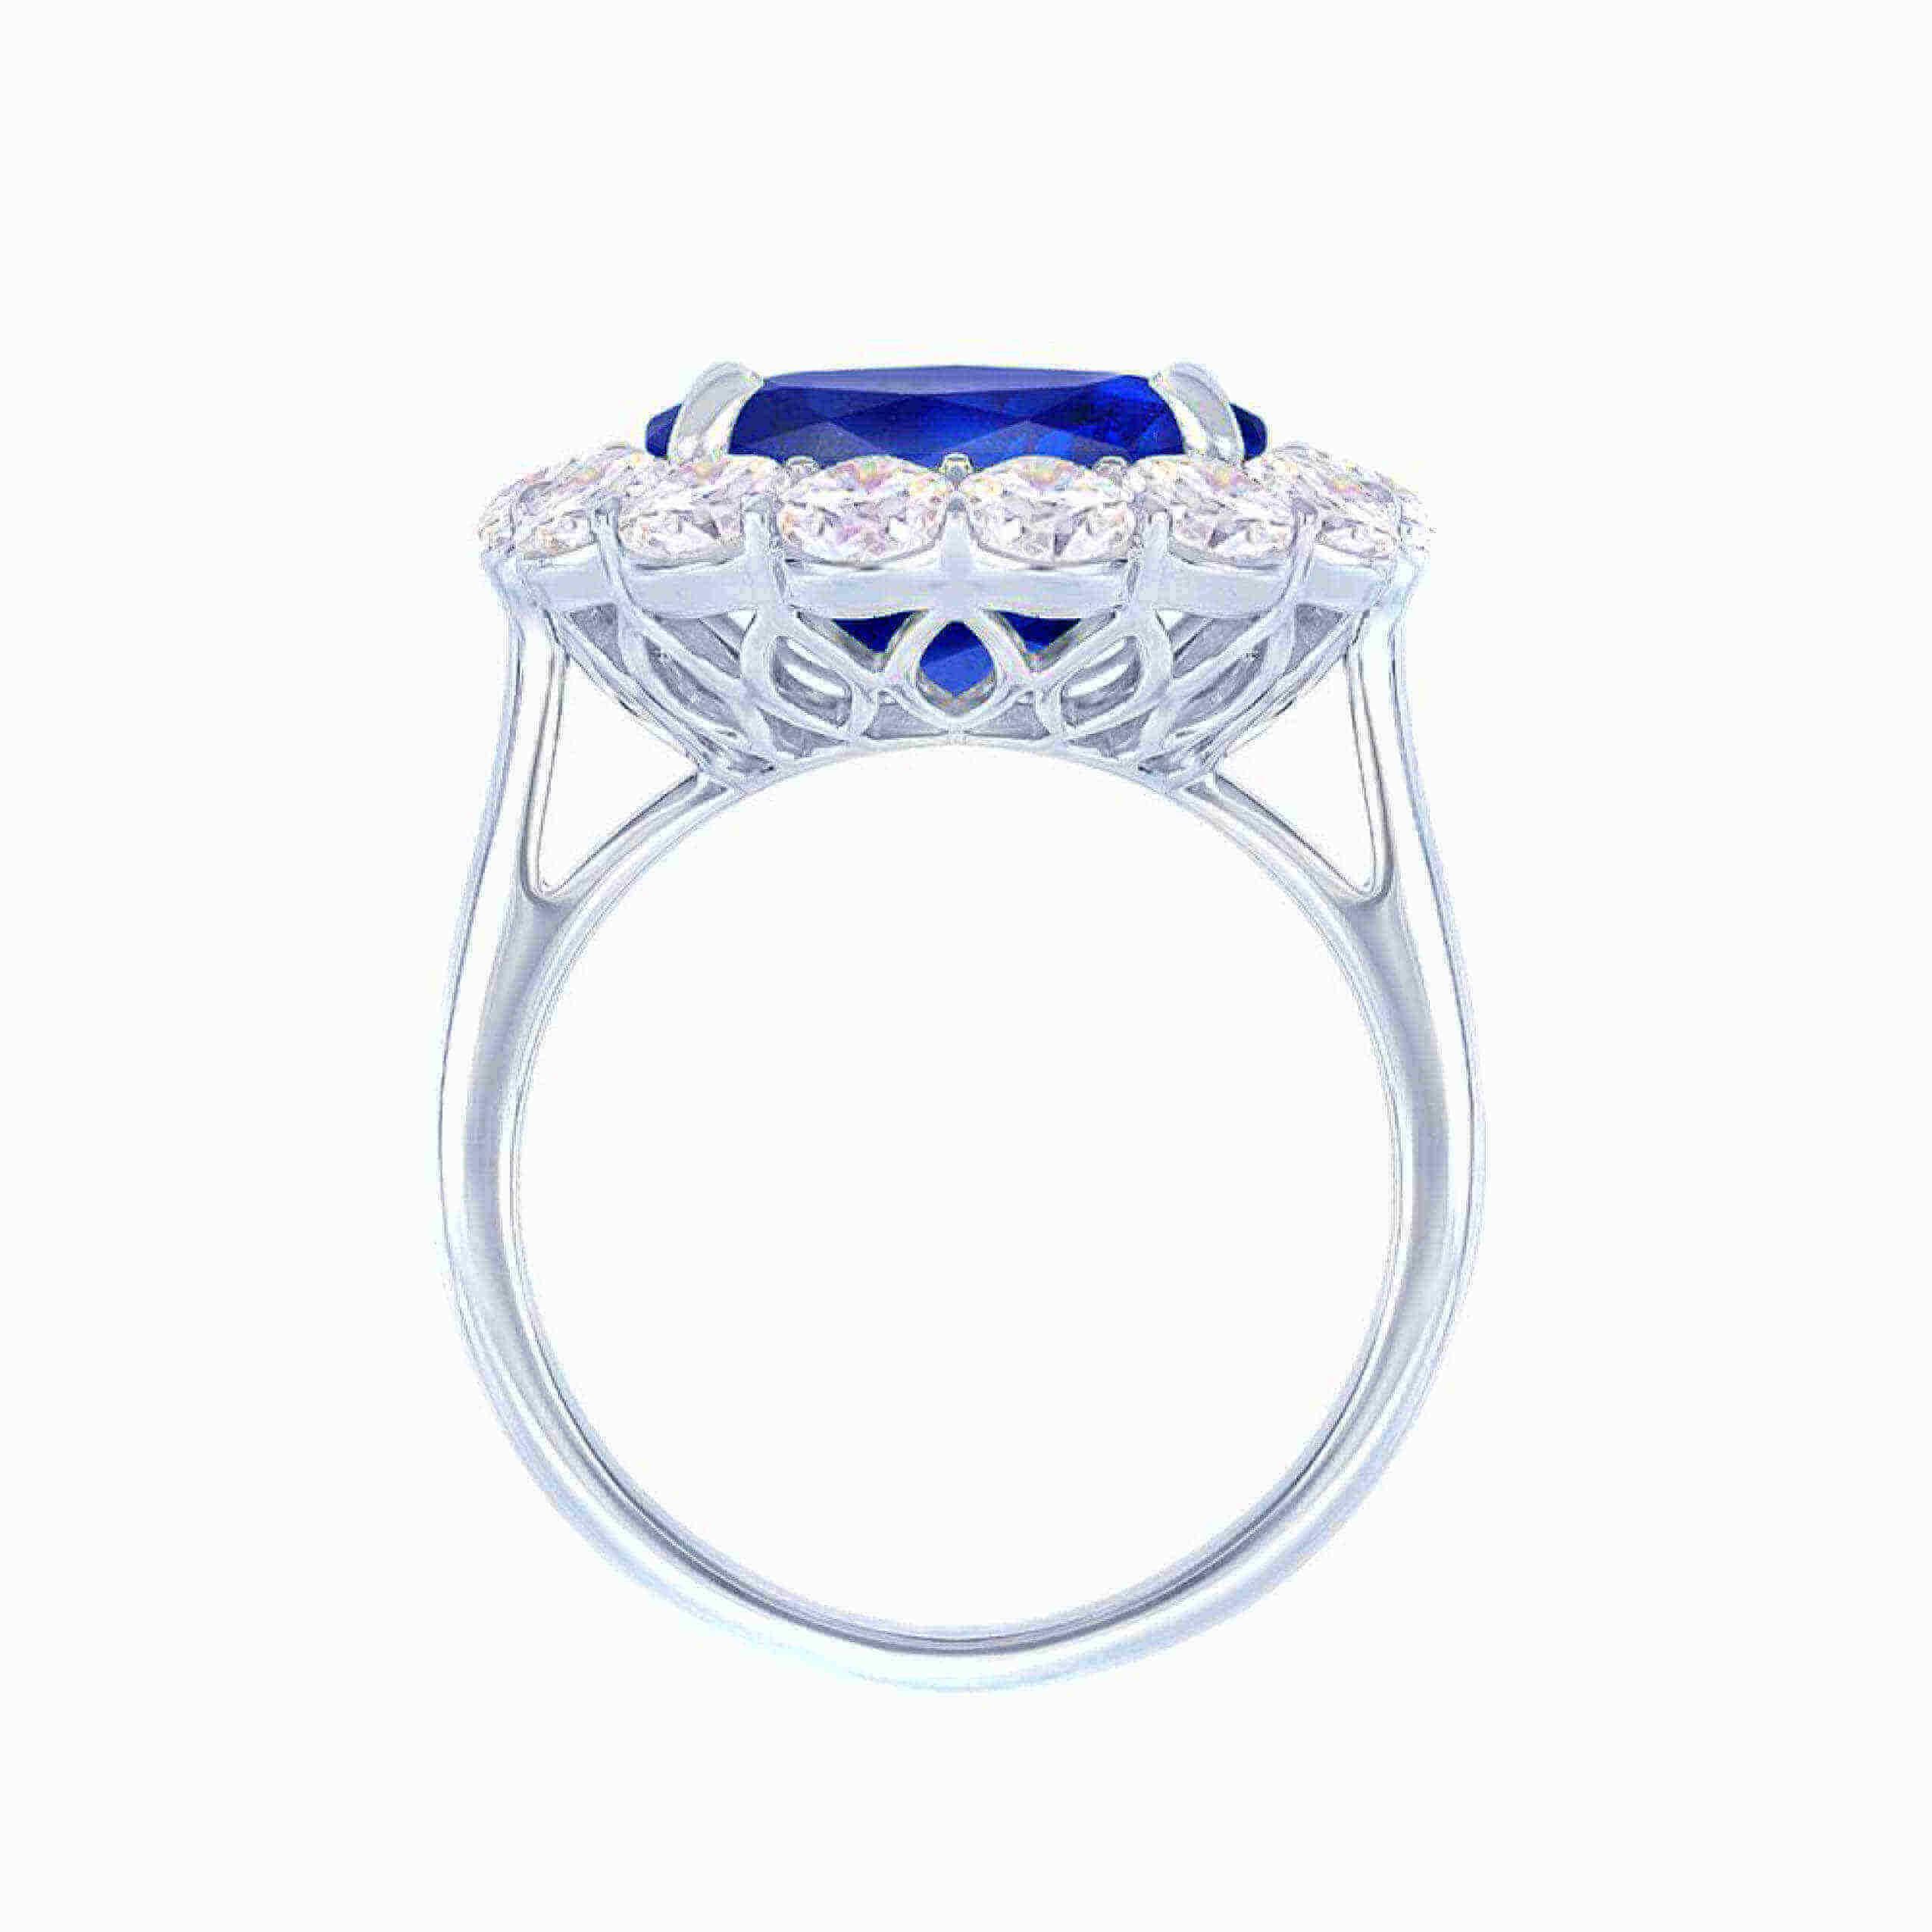 This exquisite sapphire and diamond ring showcases an 8.36-carat natural Ceylon sapphire set in prongs, with a halo of round brilliant cut diamonds encircling the center stone. The total diamond weight is 1.91 carats, boasting G color and VS1-VS2